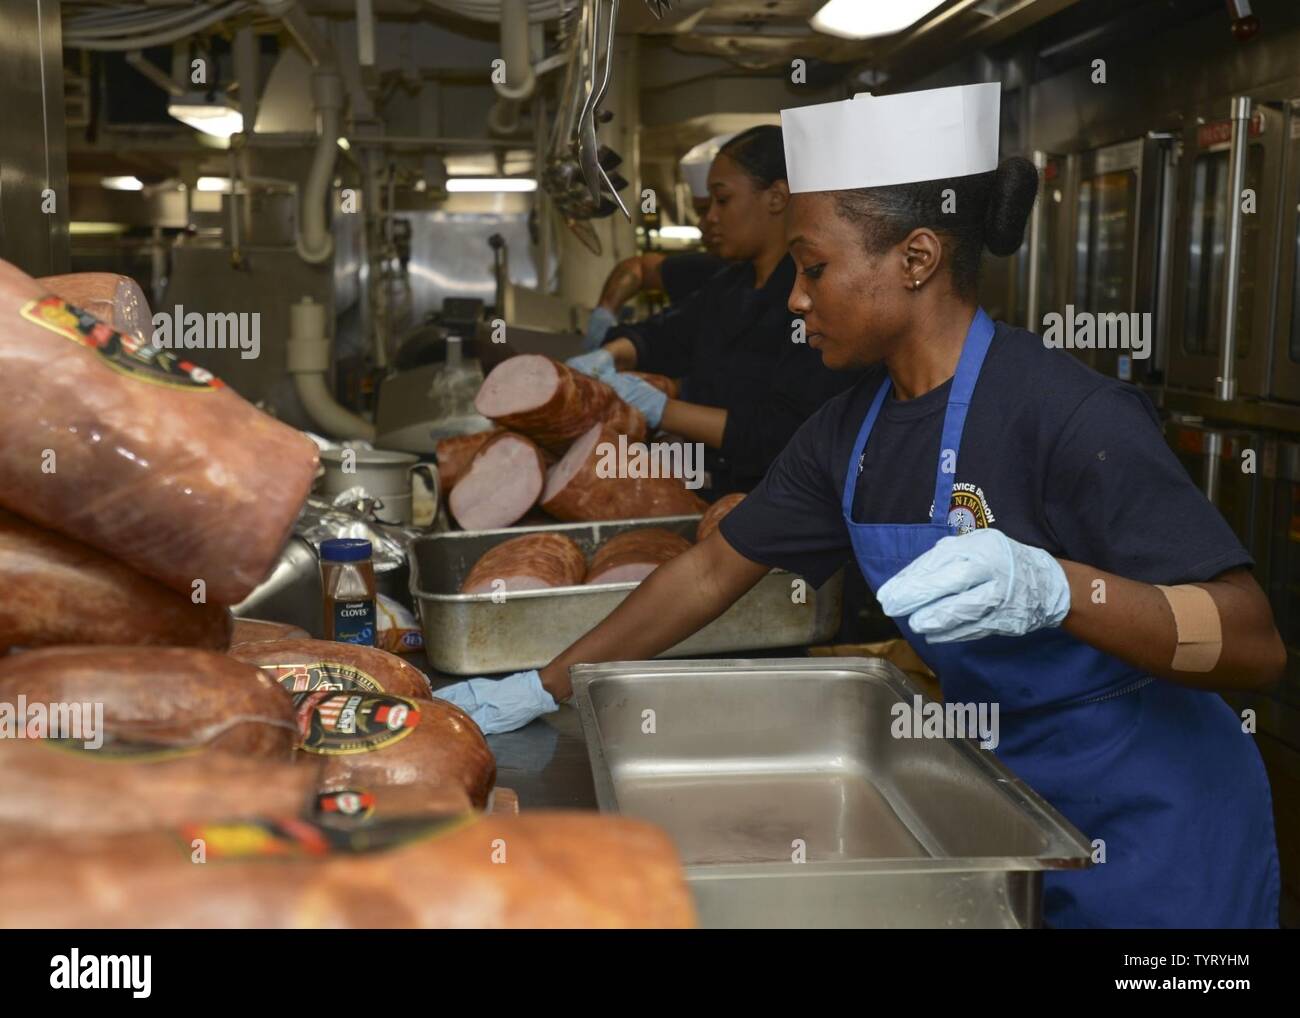 PACIFIC OCEAN (Nov. 24, 2016) Sailors assigned to the aircraft carrier USS Nimitz (CVN 68) prepare ham in the galley for a Thanksgiving celebration. Nimitz is currently underway conducting Tailored Ship's Training Availability and Final Evolution Problem (TSTA/FEP), which evaluates the crew on their performance during training drills and real-world scenarios. Once Nimitz completes TSTA/FEP they will begin Inspection and Survey (INSURV) and Composite Training Unit Exercise (COMPTUEX) in preparation for an upcoming 2017 deployment. Stock Photo